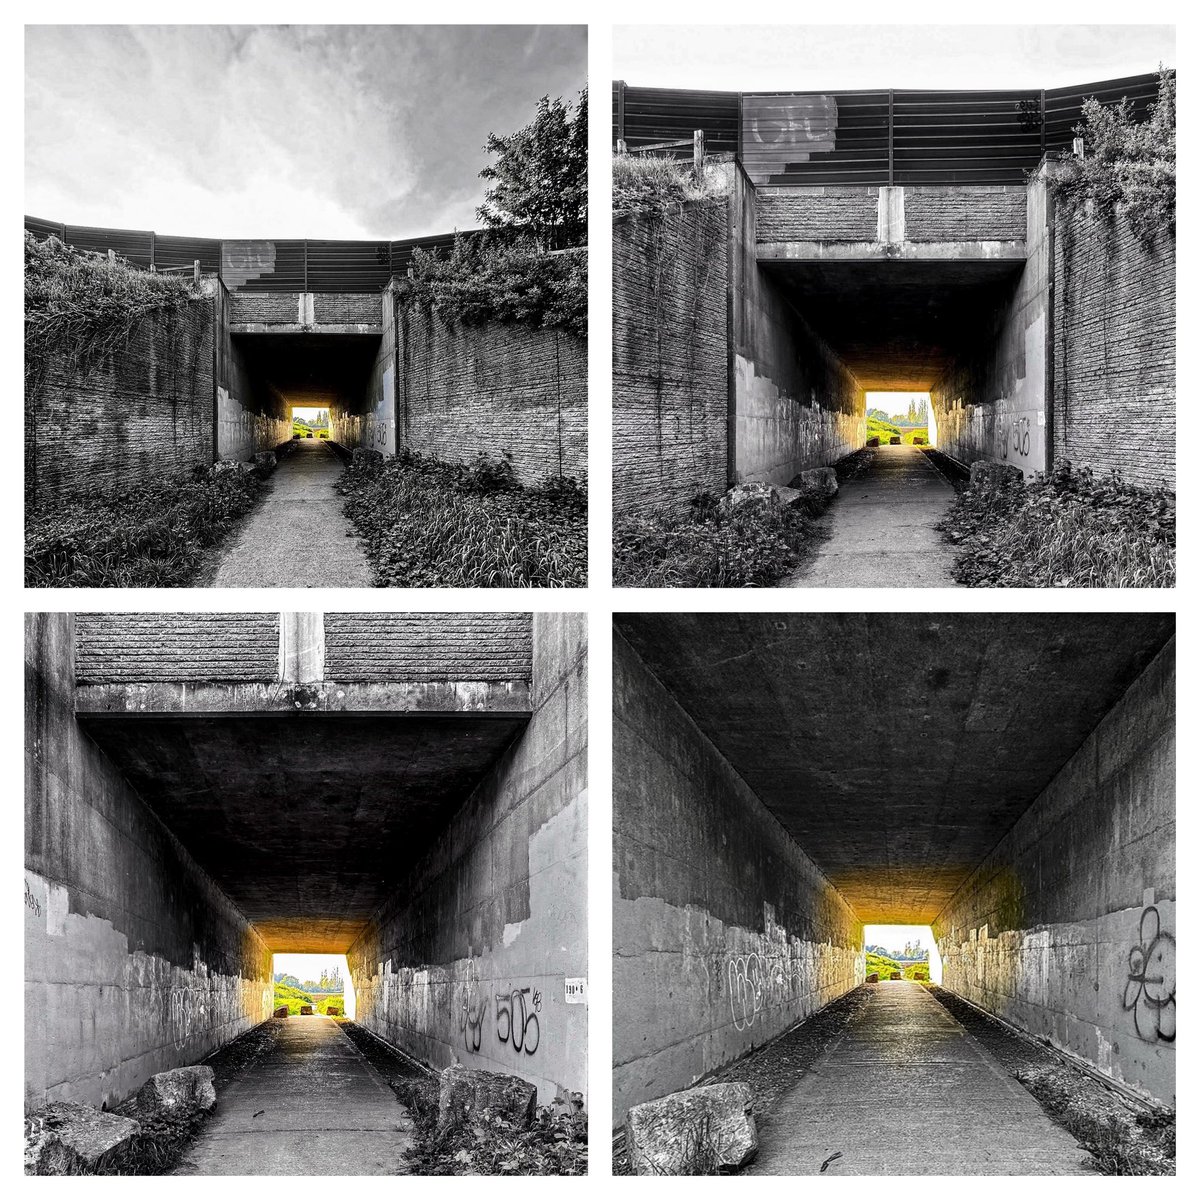 Light at the End of the Tunnel
#landscapephotography #tunnel #underpass #light #dark  #rawphotography #shotoniphone